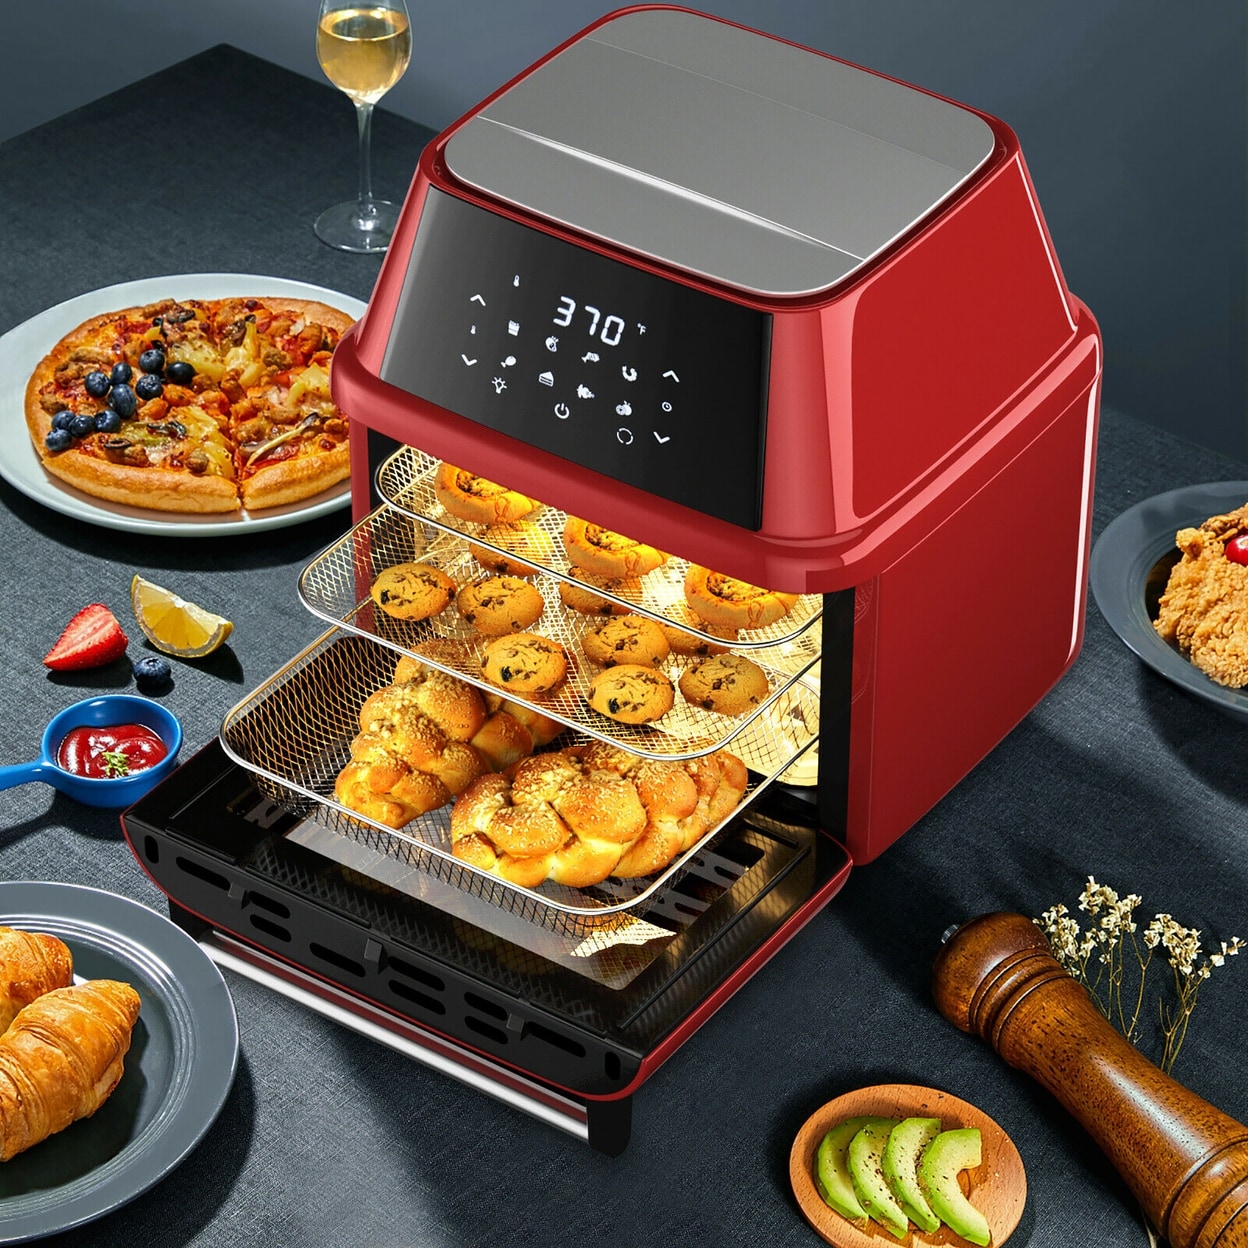 https://ak1.ostkcdn.com/images/products/is/images/direct/3484af1d2b3615487abb049f799b9c98824d76f2/Costway-19-Qt-MultiFunctional-Air-Fryer-Oven-Dehydrator-Rotisserie-with-Accessories-WhiteGreenRed.jpg